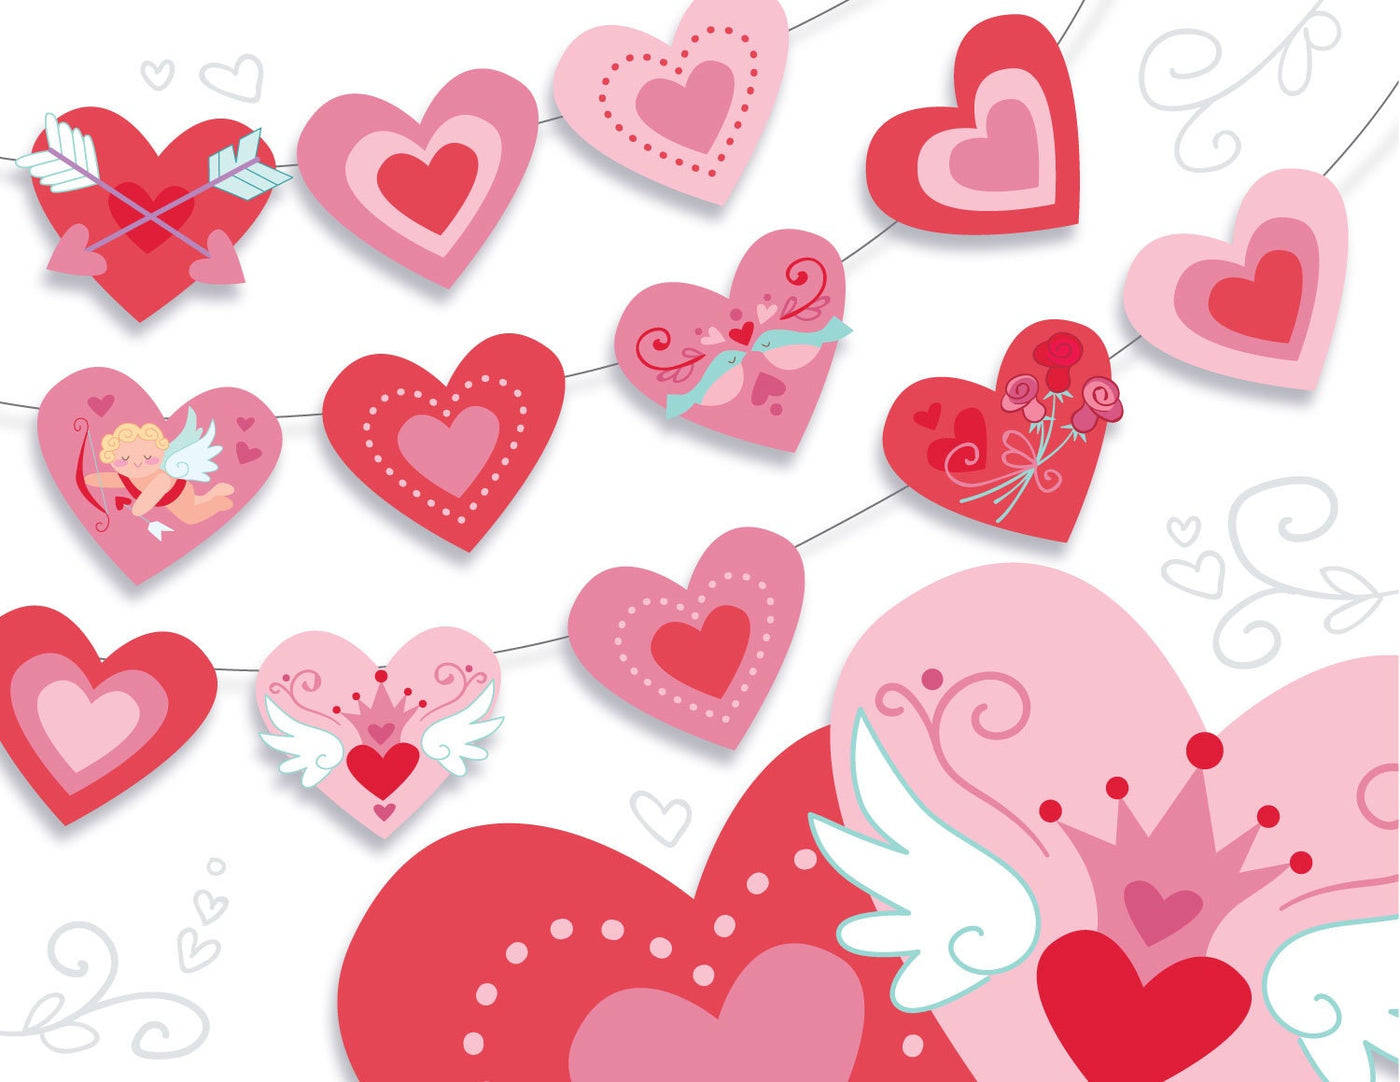 Printable Valentine's Day Hearts for Garlands, Party Decorations and more